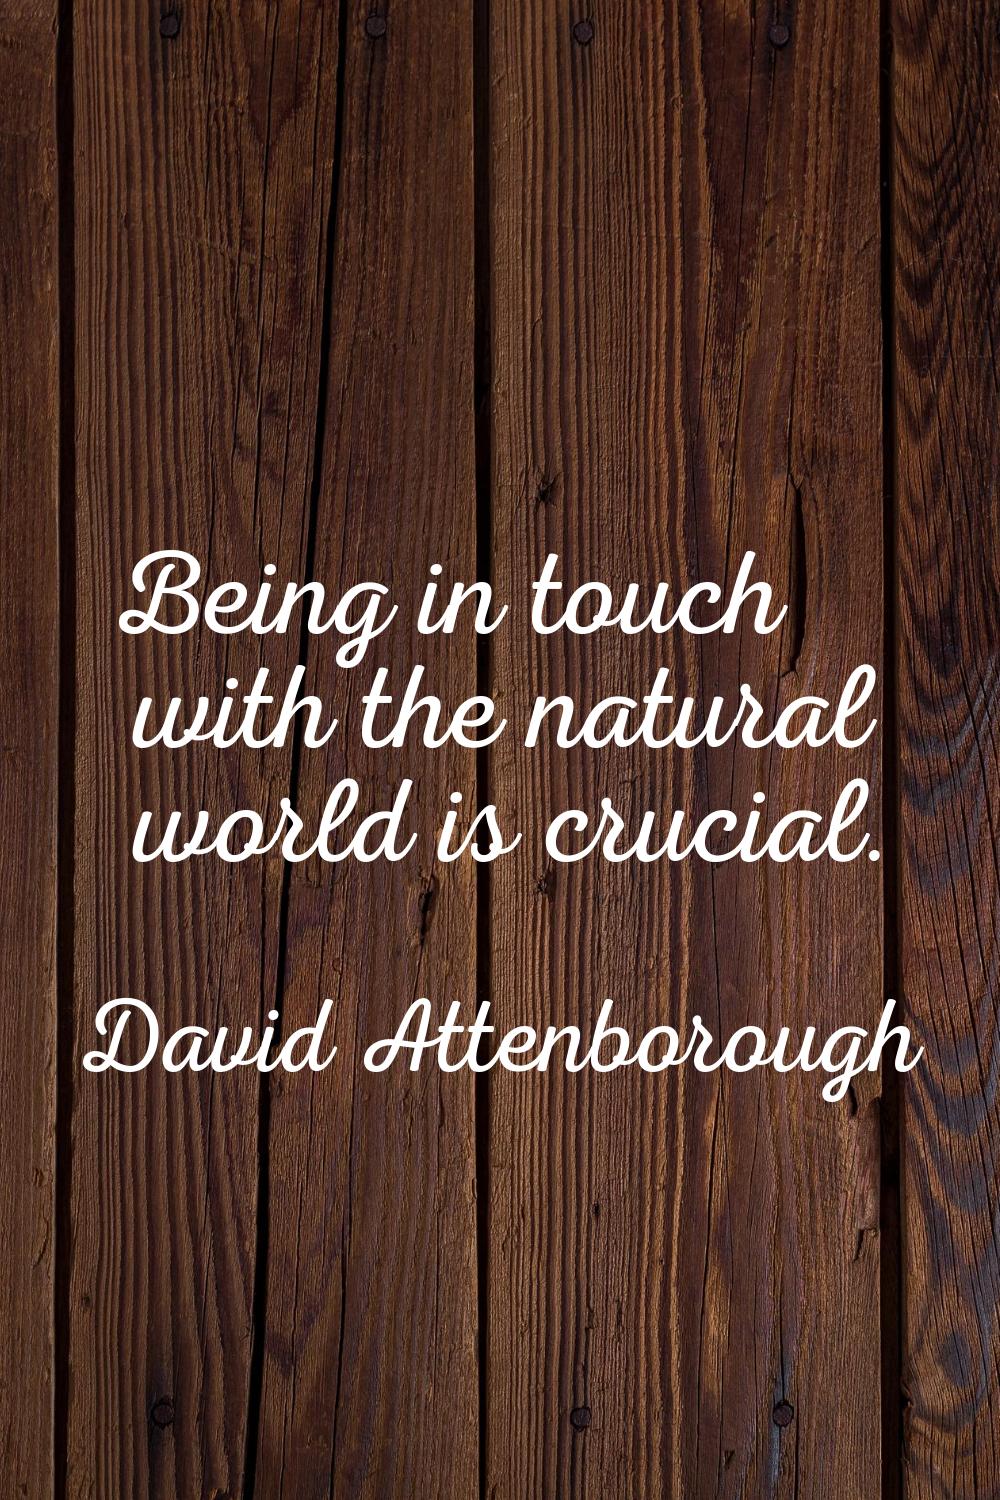 Being in touch with the natural world is crucial.